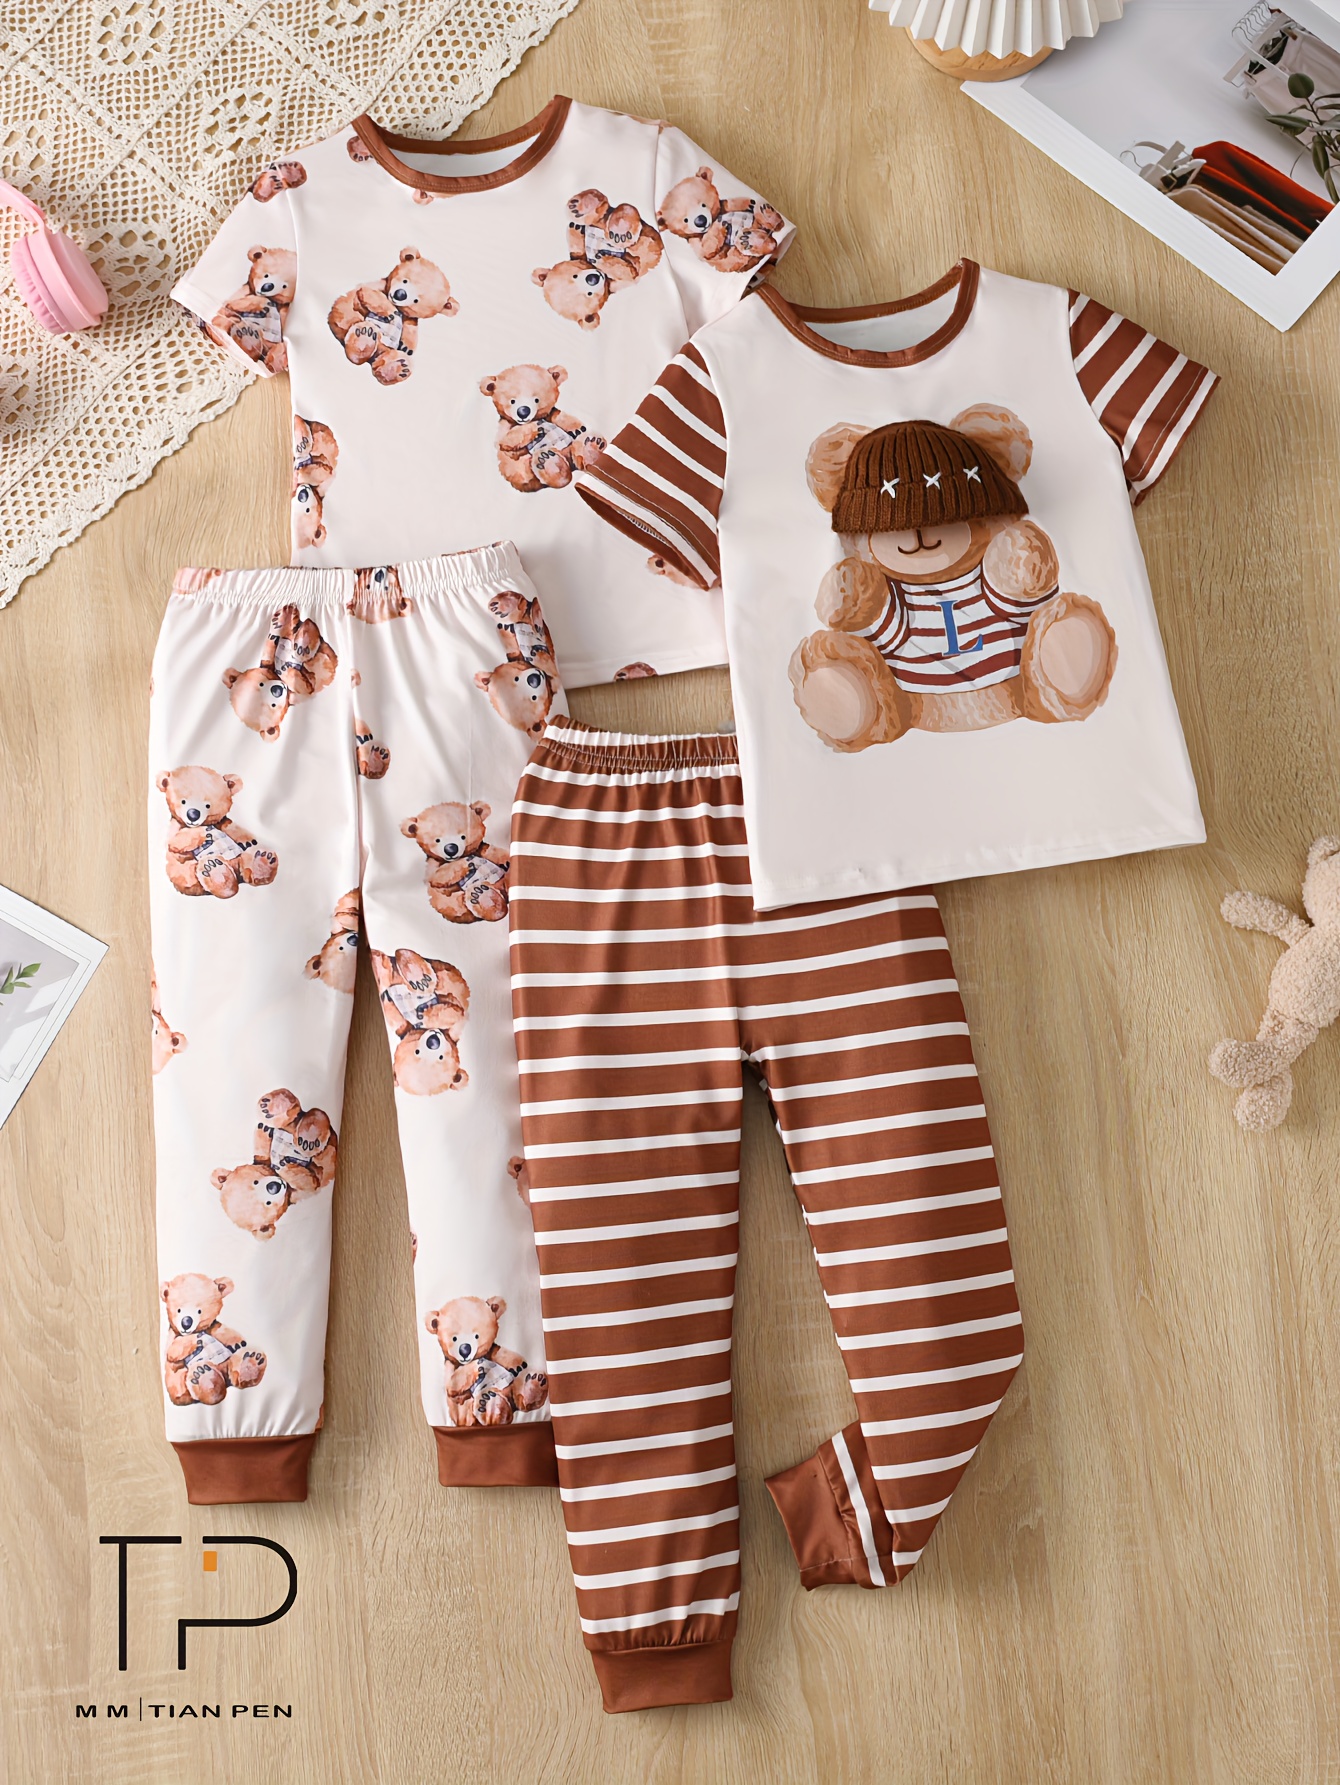 New Look Fashion Summer Collection Children's Clothes Striped